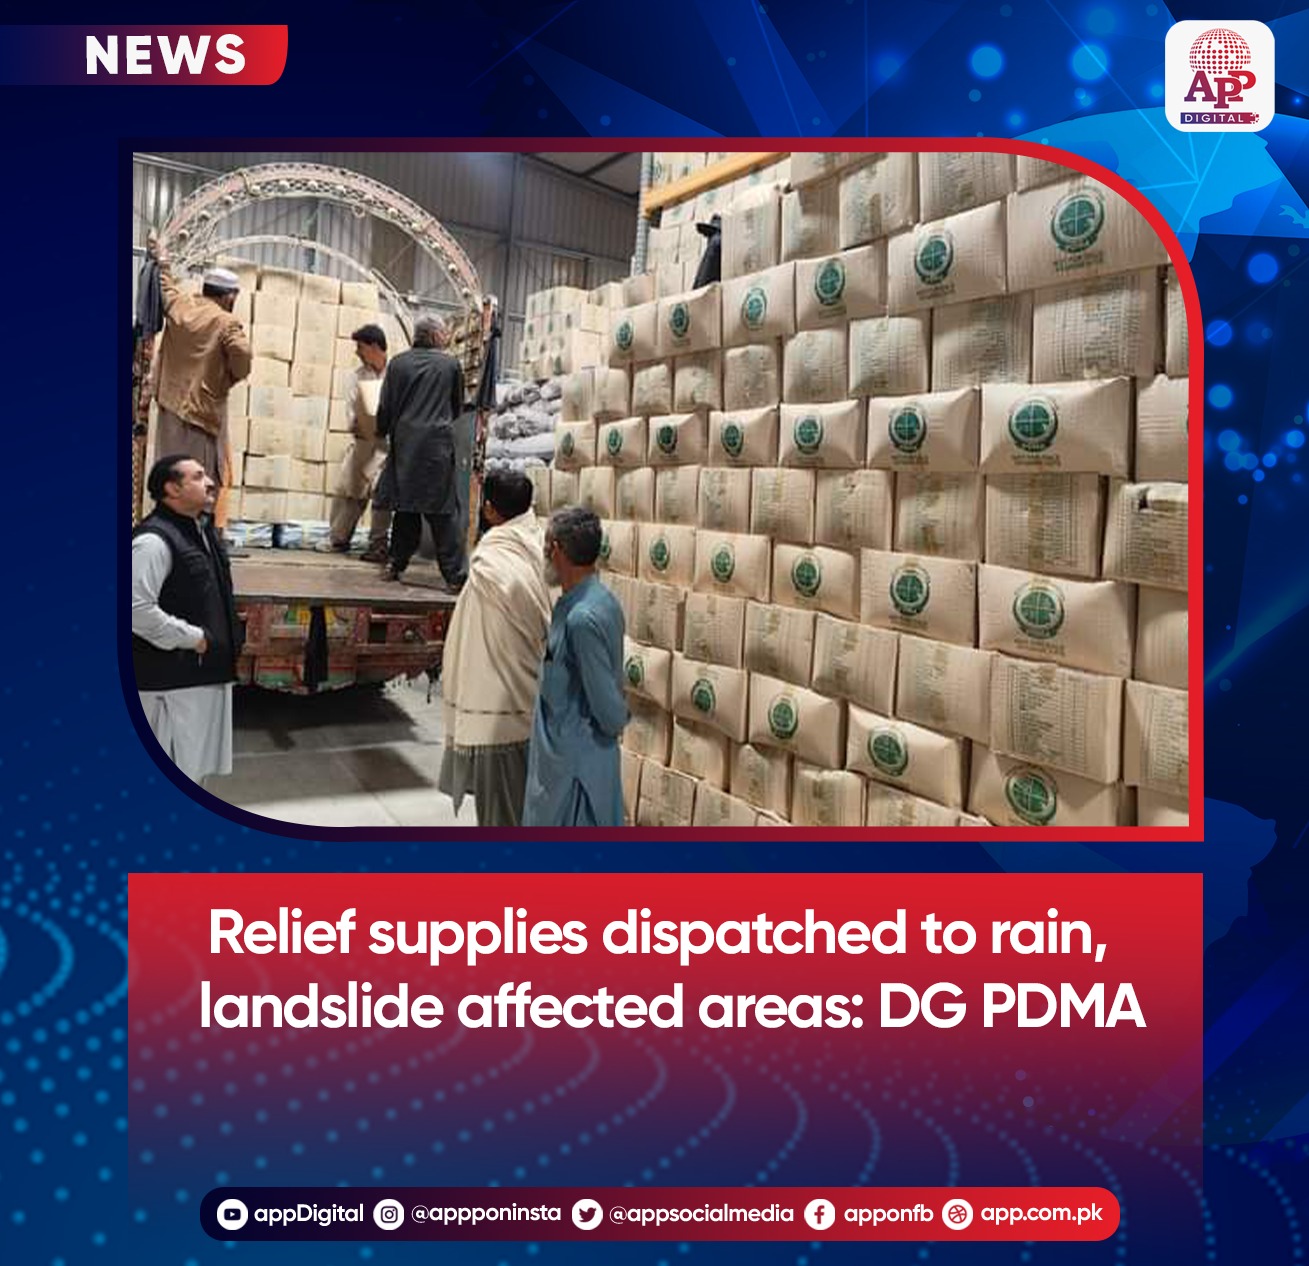 Relief supplies dispatched to rain, landslide affected areas: DG PDMA